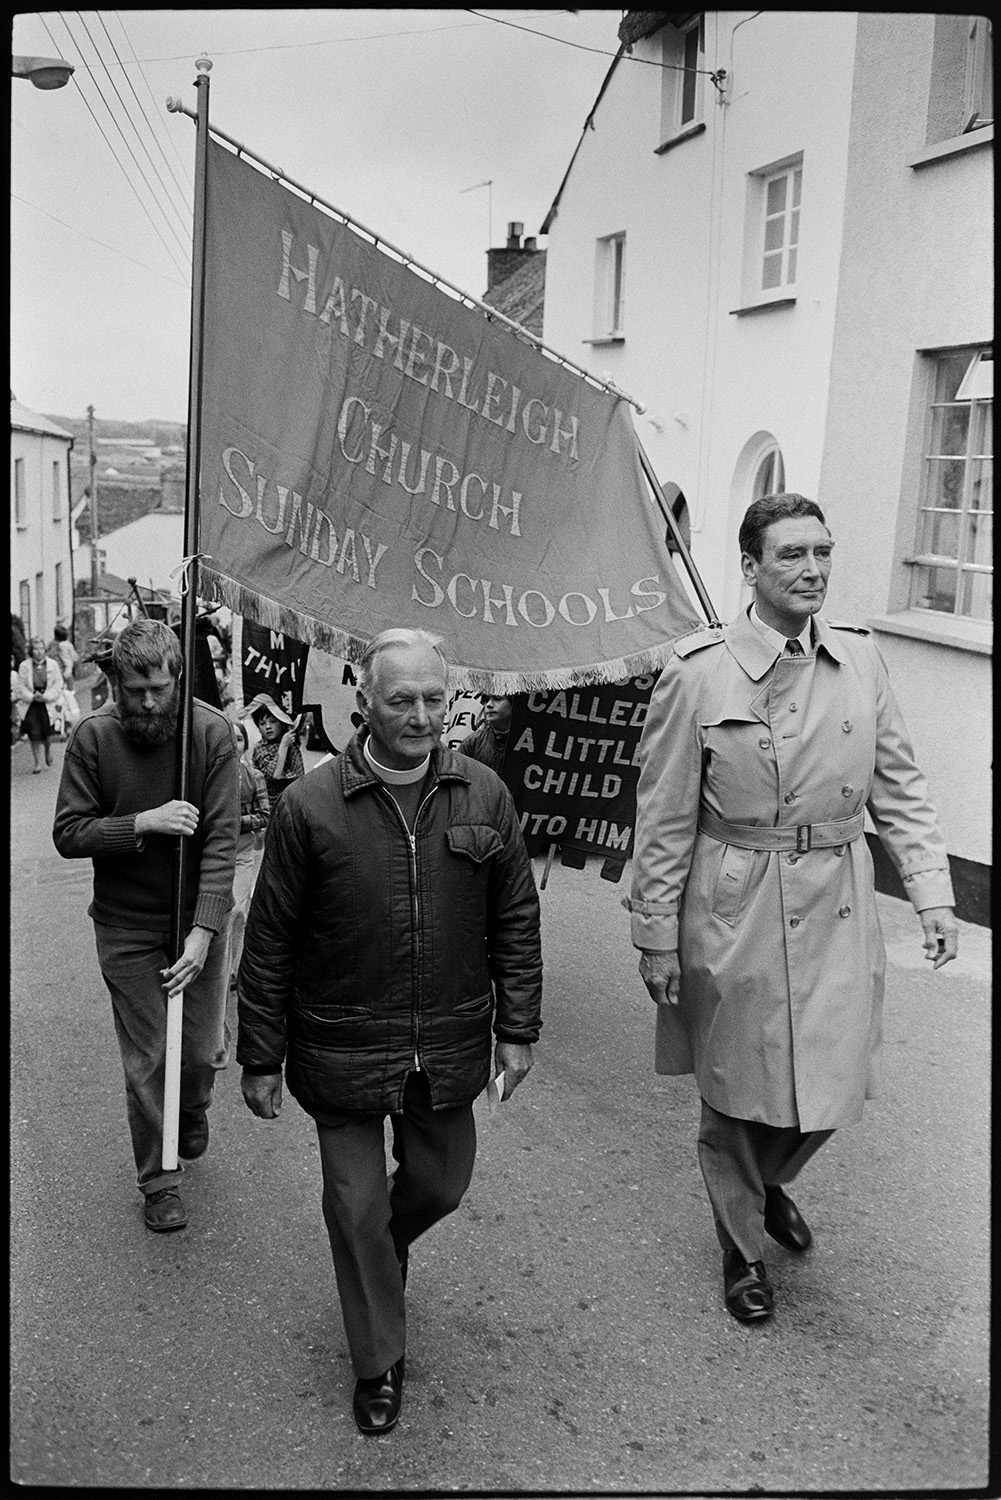 Church Sunday School Parade with banners and Silver Band marching behind garland.
[Vicar and a man marching along a street in Hatherleigh in the Hatherleigh Church Sunday Schools Parade, with a large banner being carried behind them. Children are carrying smaller banners in the background.]